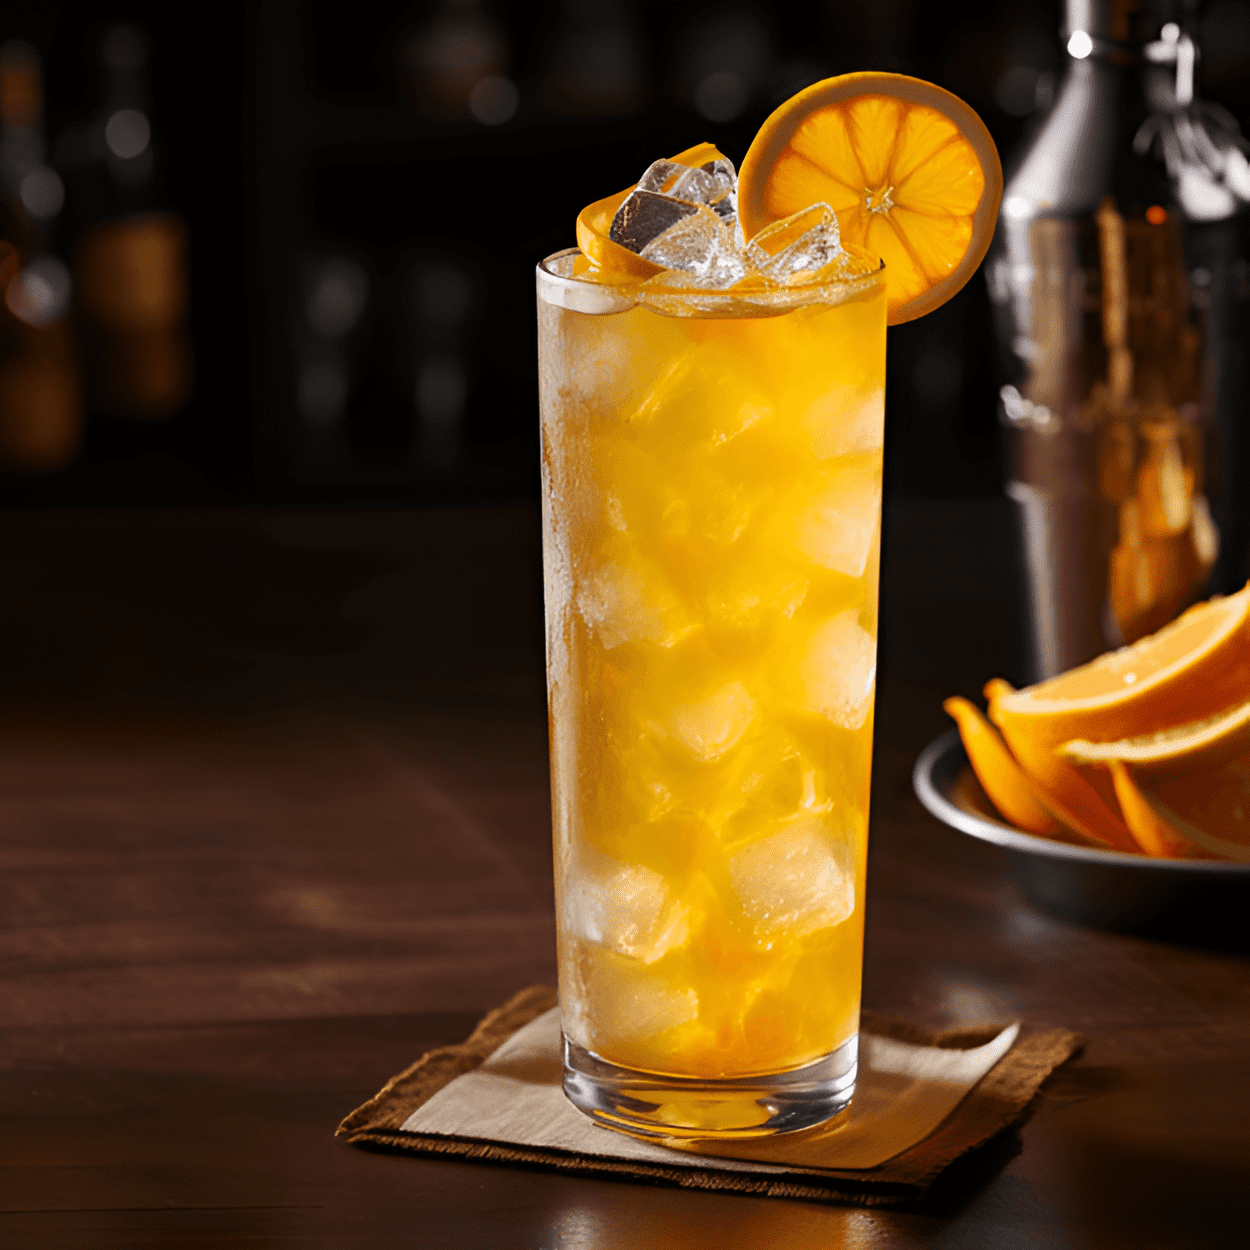 Ginger Screwdriver Cocktail Recipe - The Ginger Screwdriver is a sweet, tangy, and slightly spicy cocktail. The sweetness of the orange juice is balanced by the sharpness of the vodka, while the ginger beer adds a spicy kick that lingers on the palate.